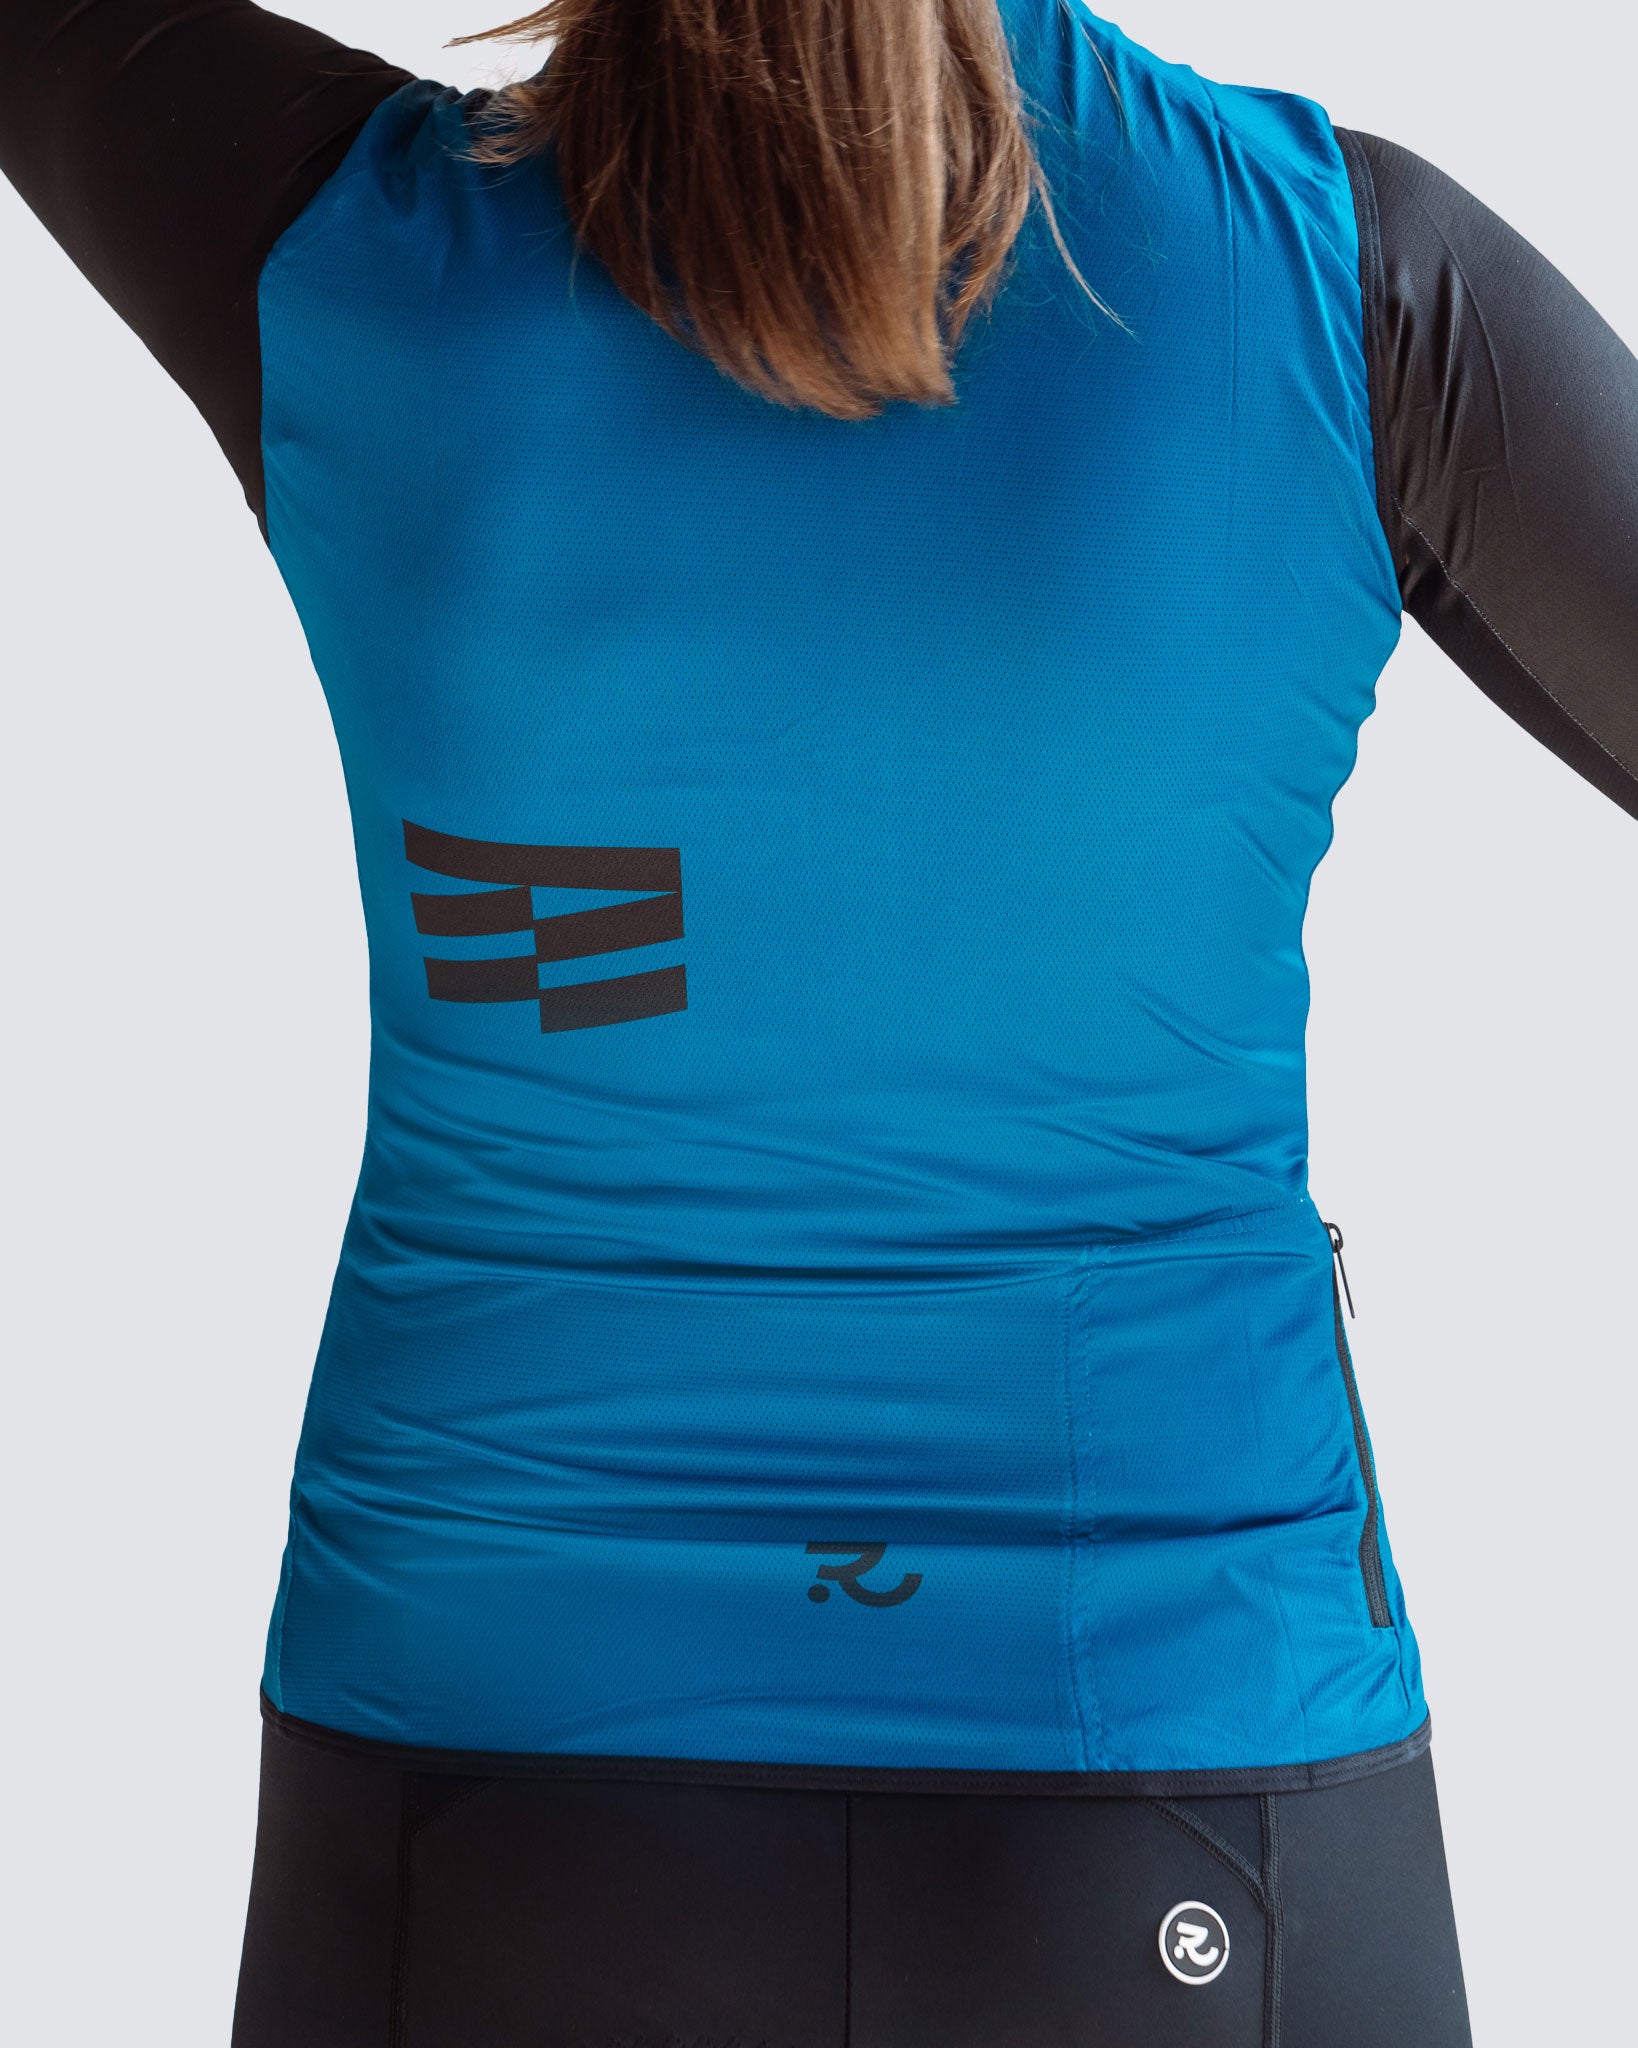 back view fo wavy teal cycling vest